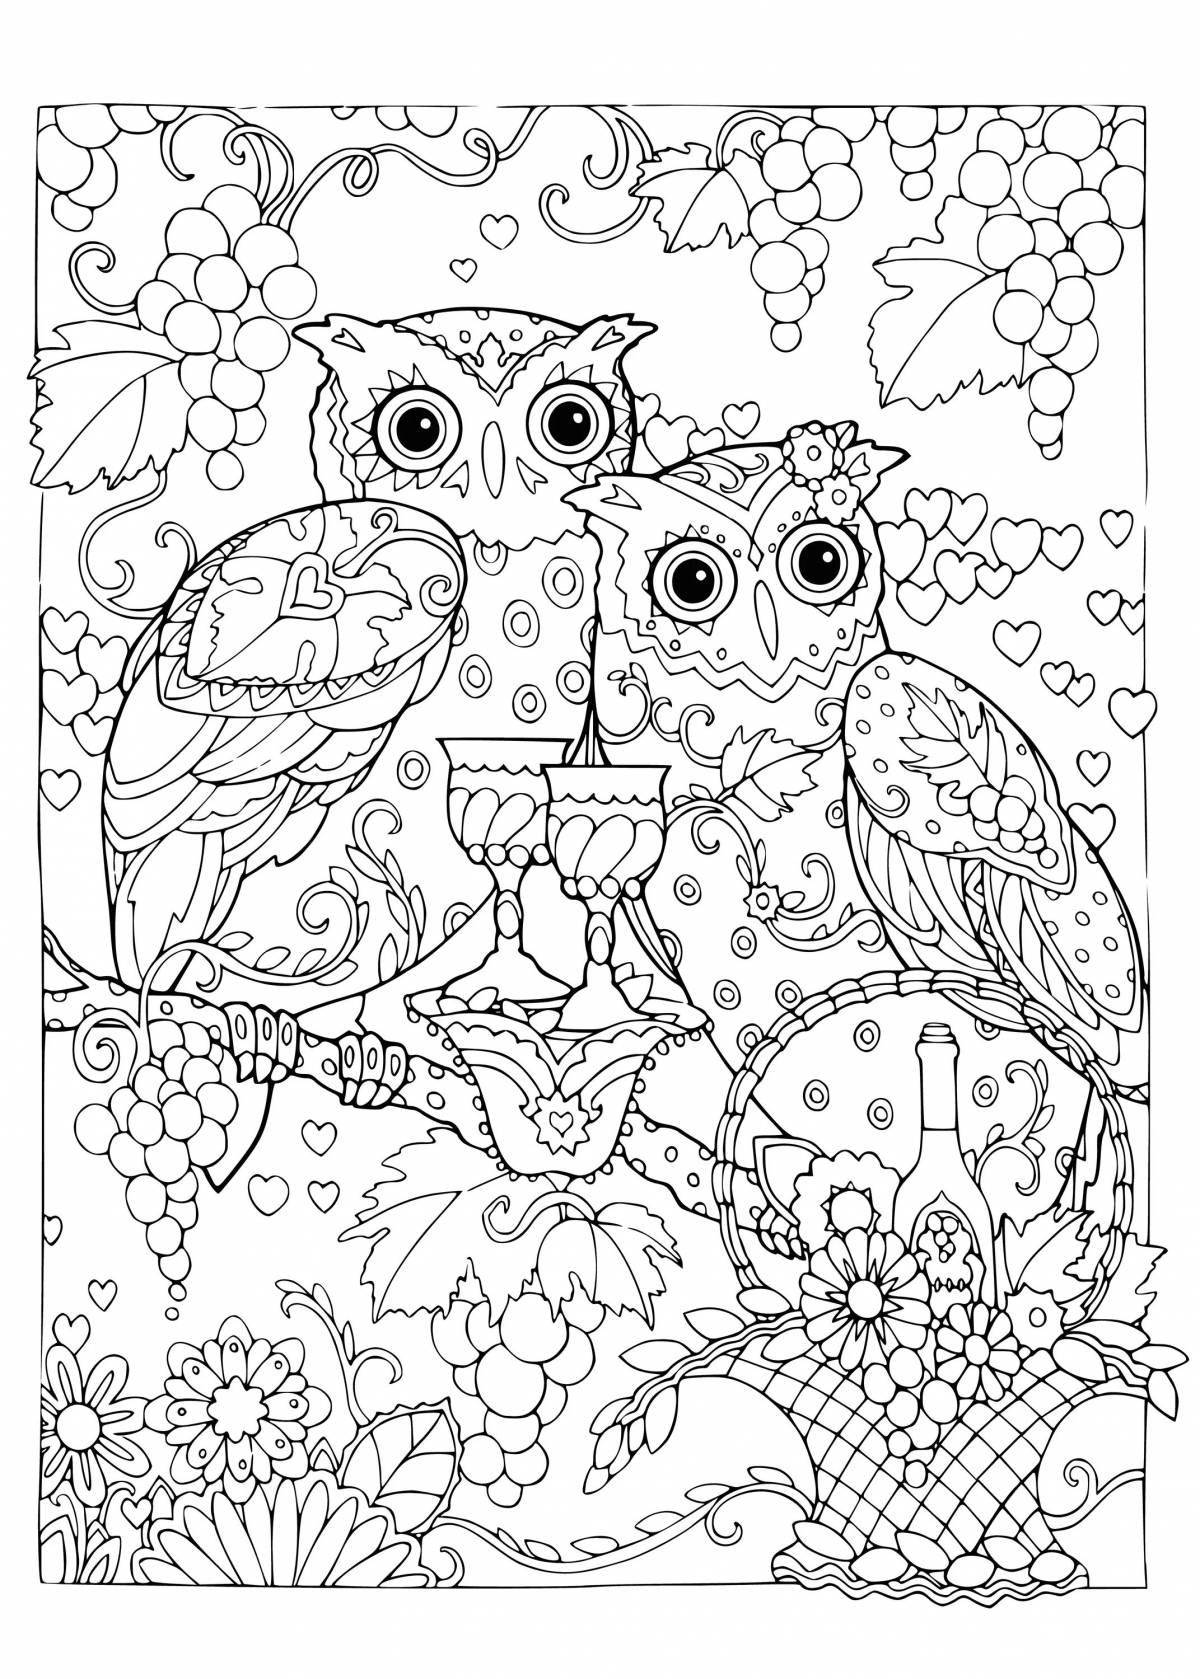 Exciting soothing coloring pages